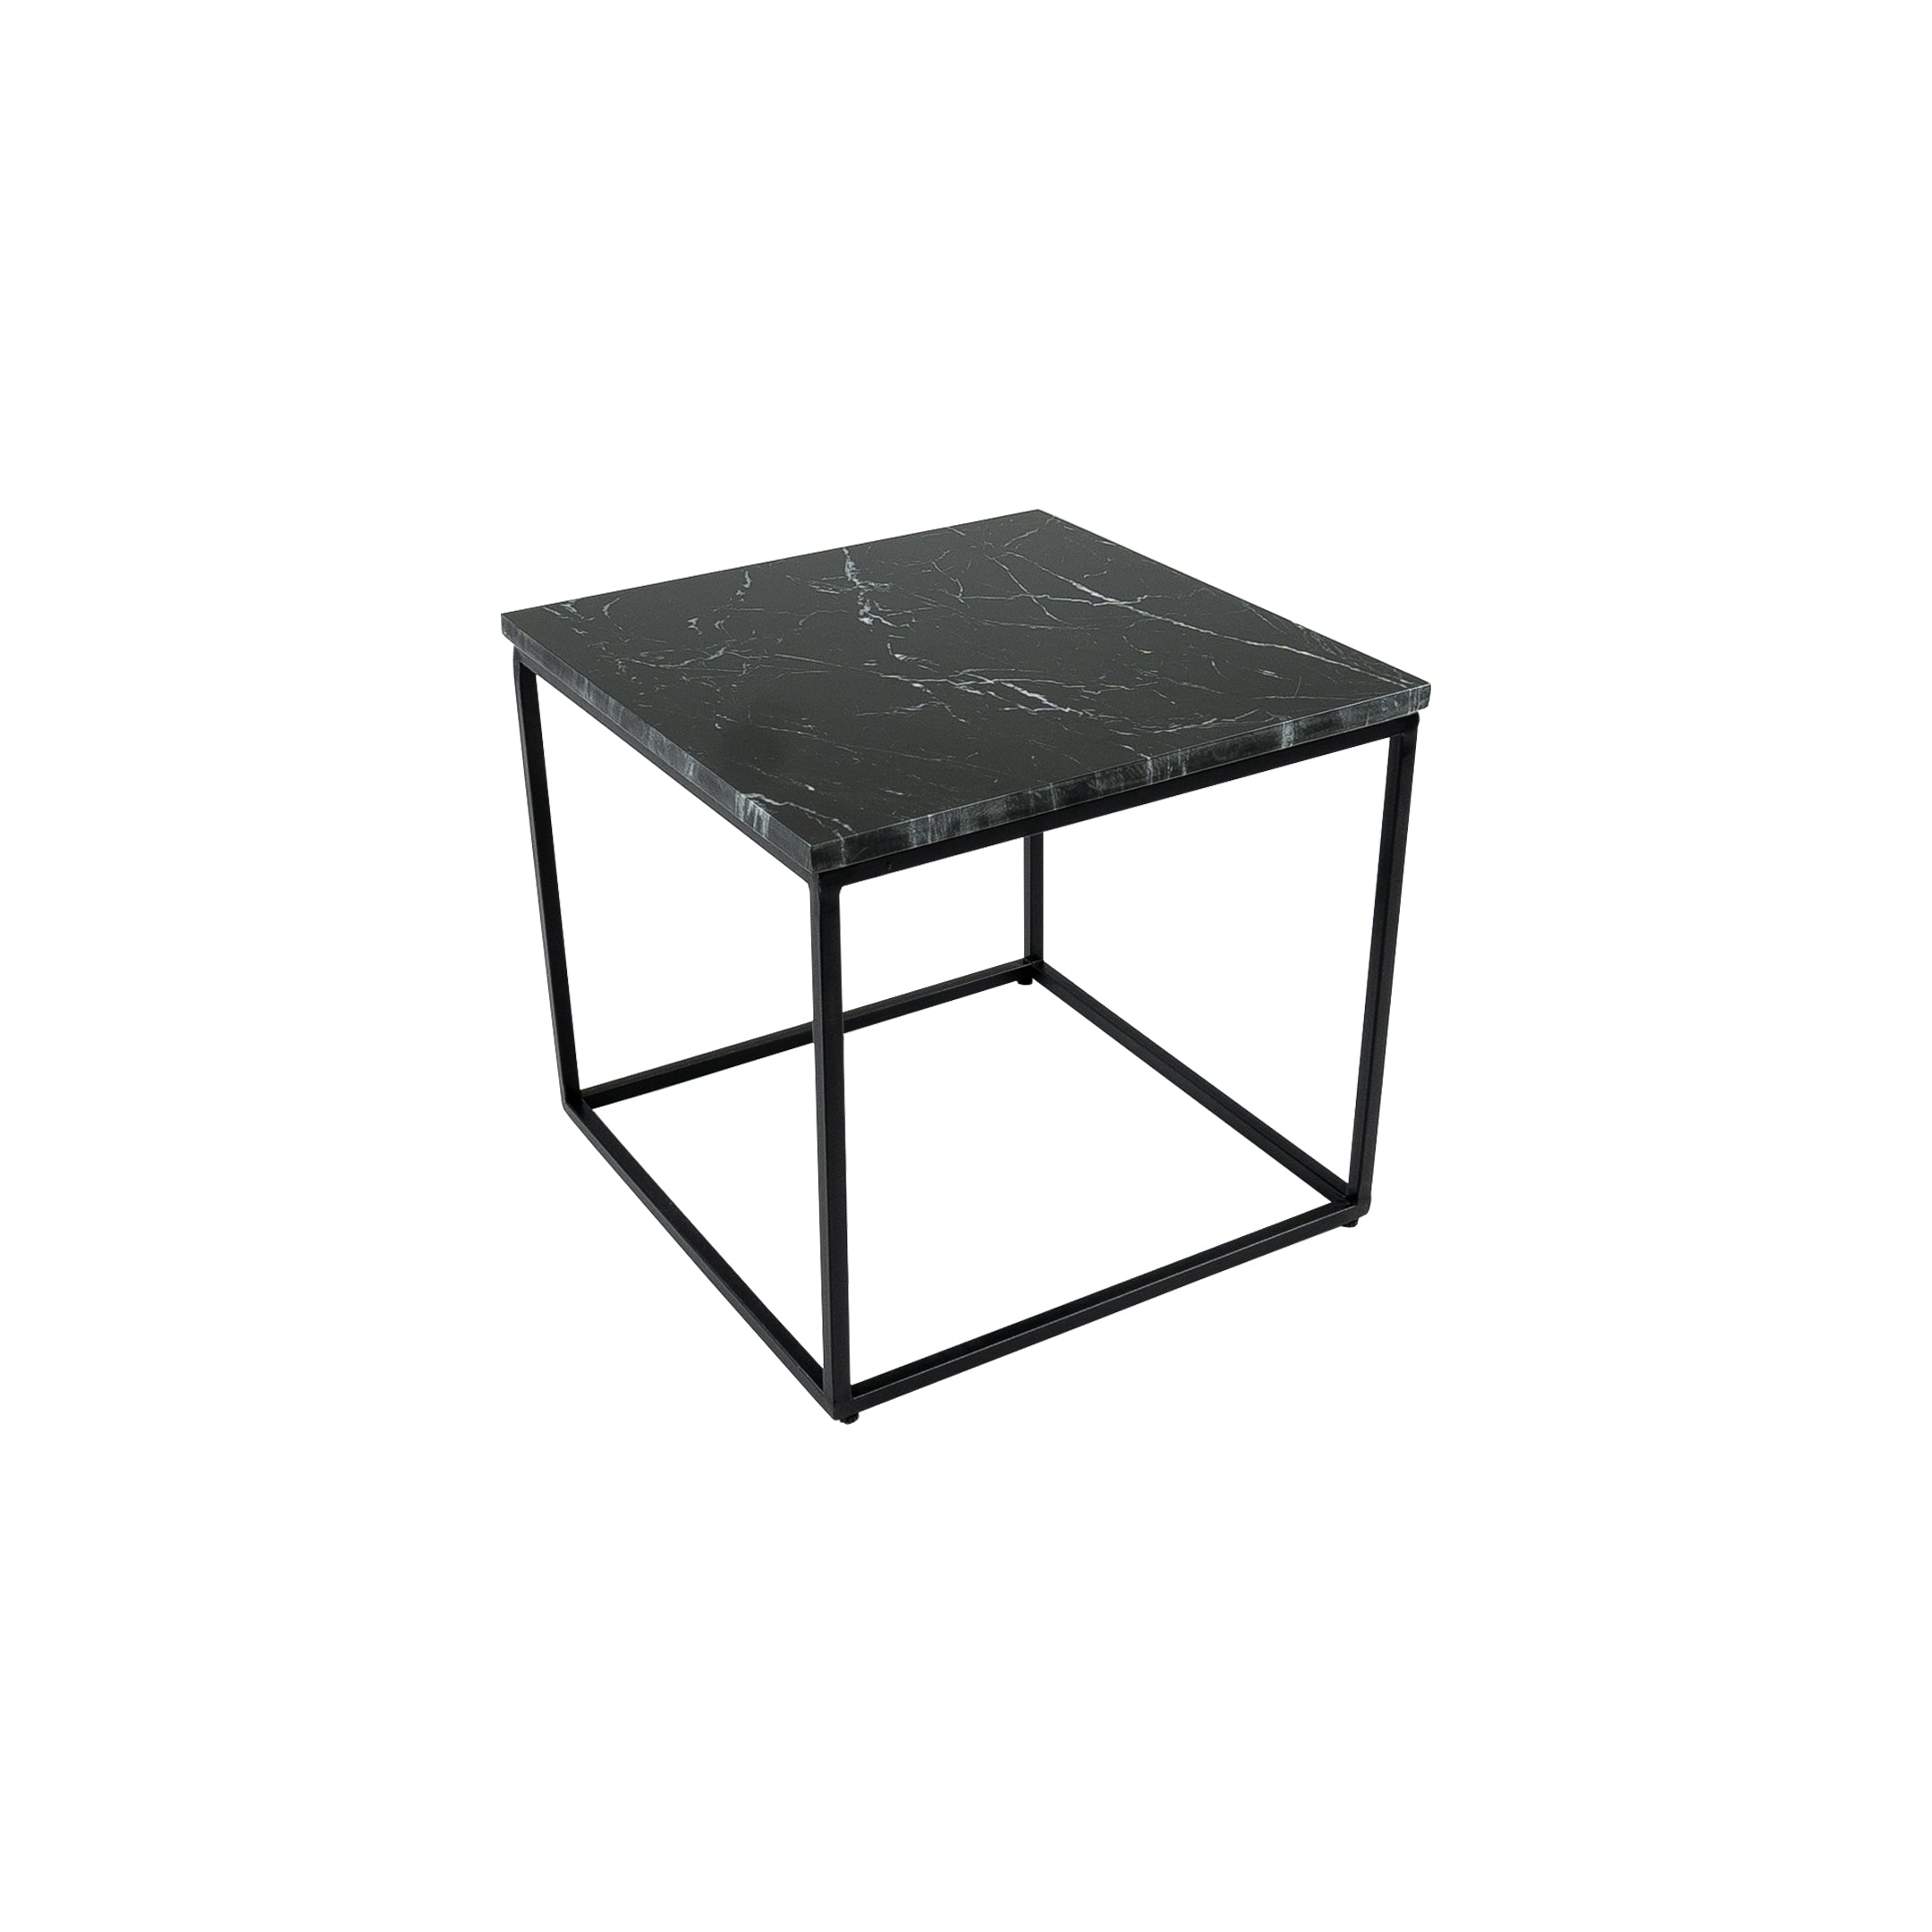 Kick side table Marble 50x50cm